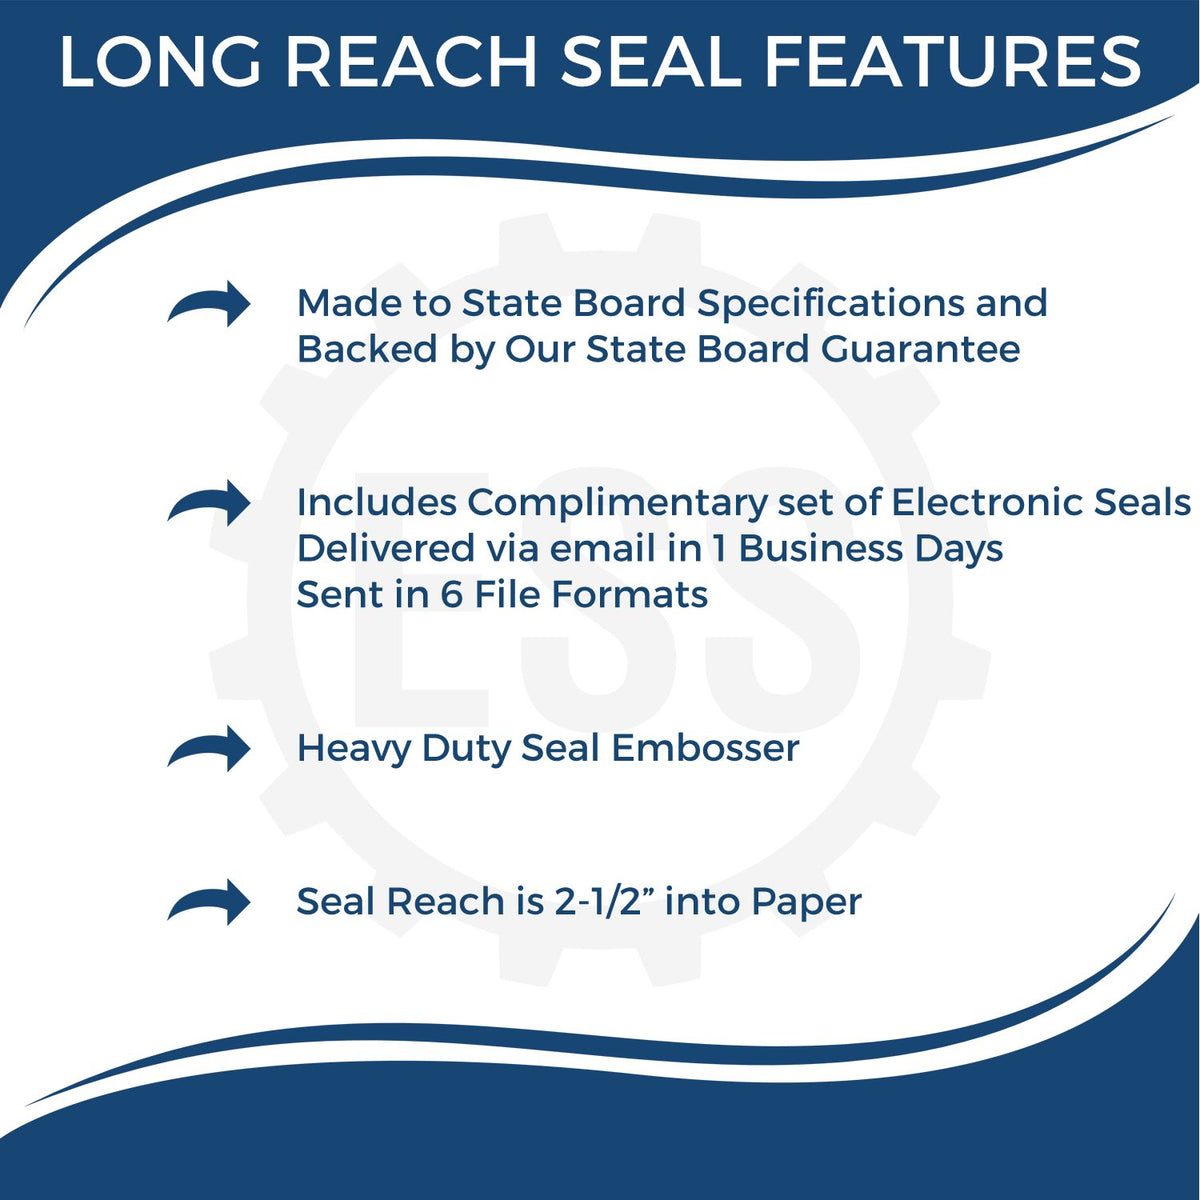 A picture of an infographic highlighting the selling points for the Long Reach Oregon Geology Seal